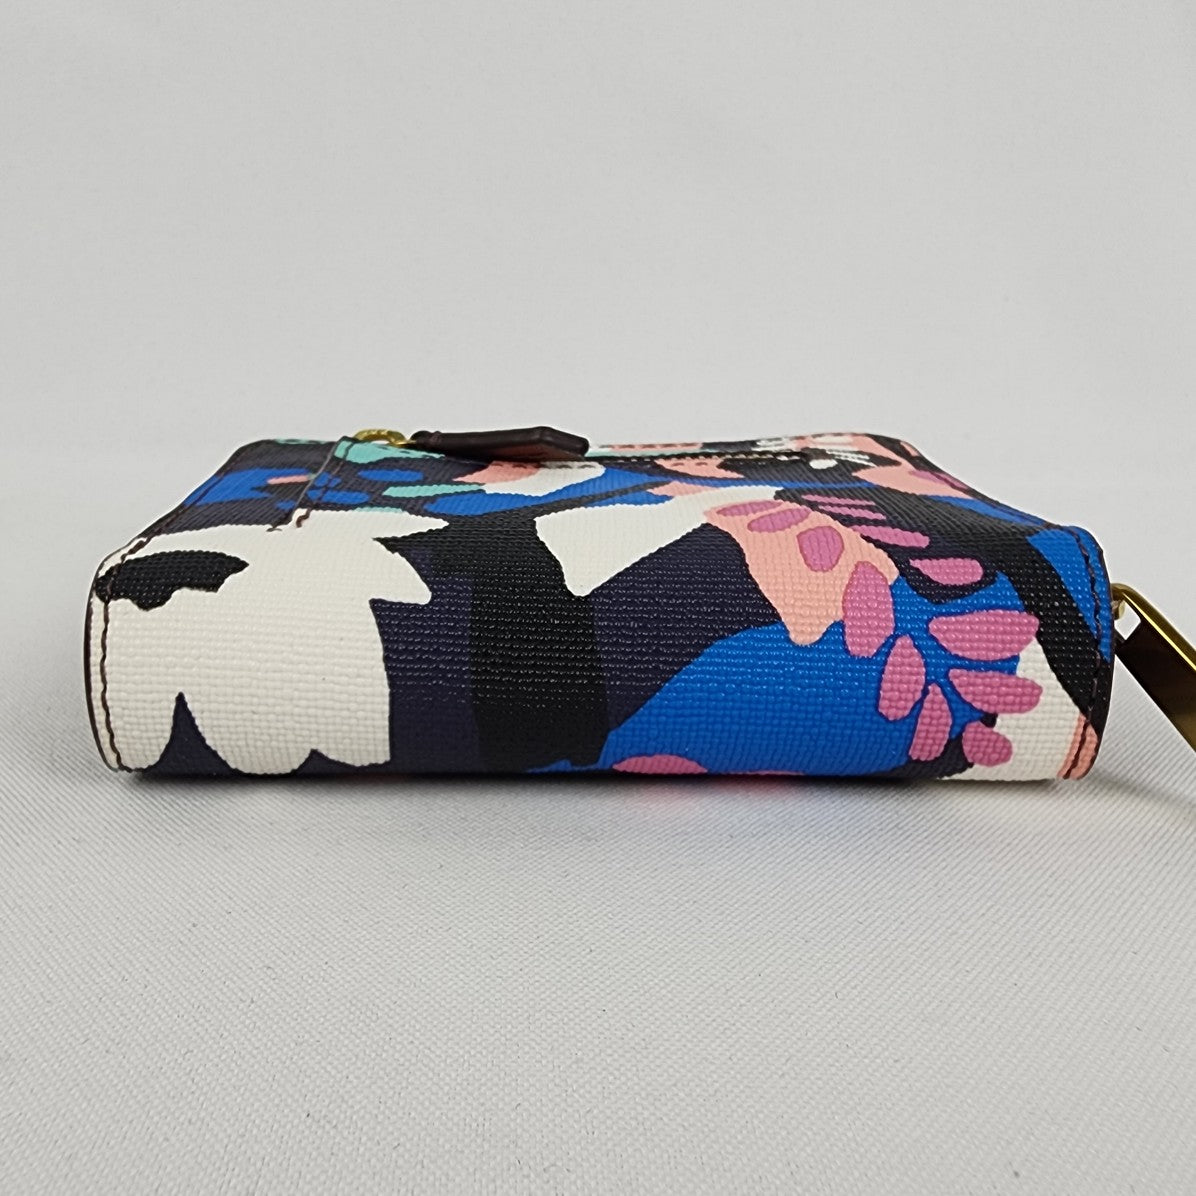 Fossil Pink & Blue Flower Print Leather Wallet